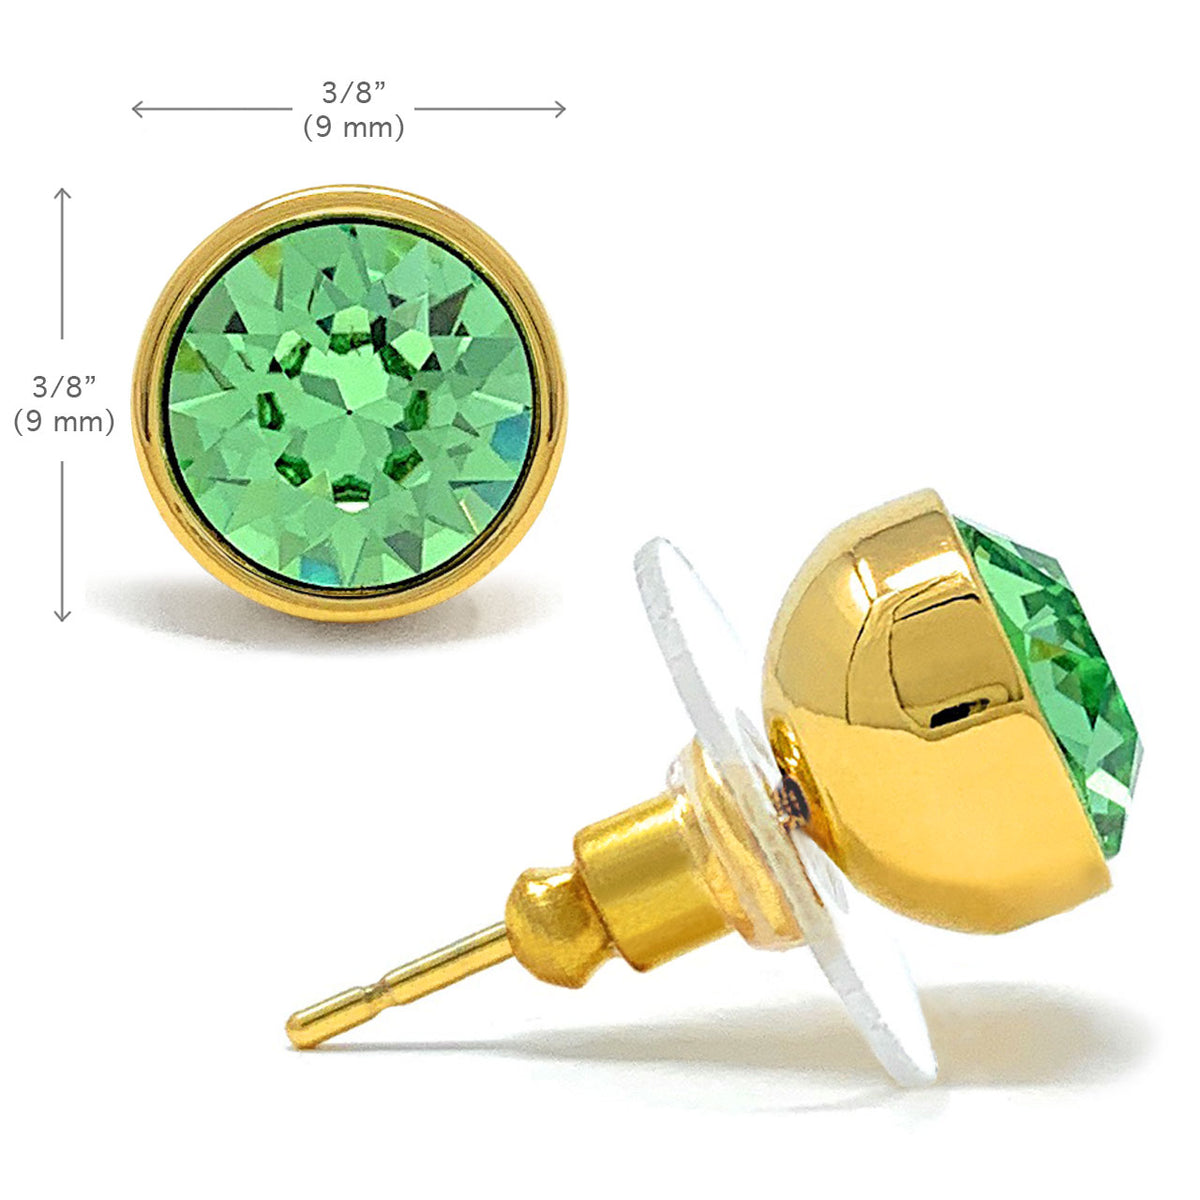 Harley Stud Earrings with Green Peridot Round Crystals from Swarovski Gold Plated - Ed Heart